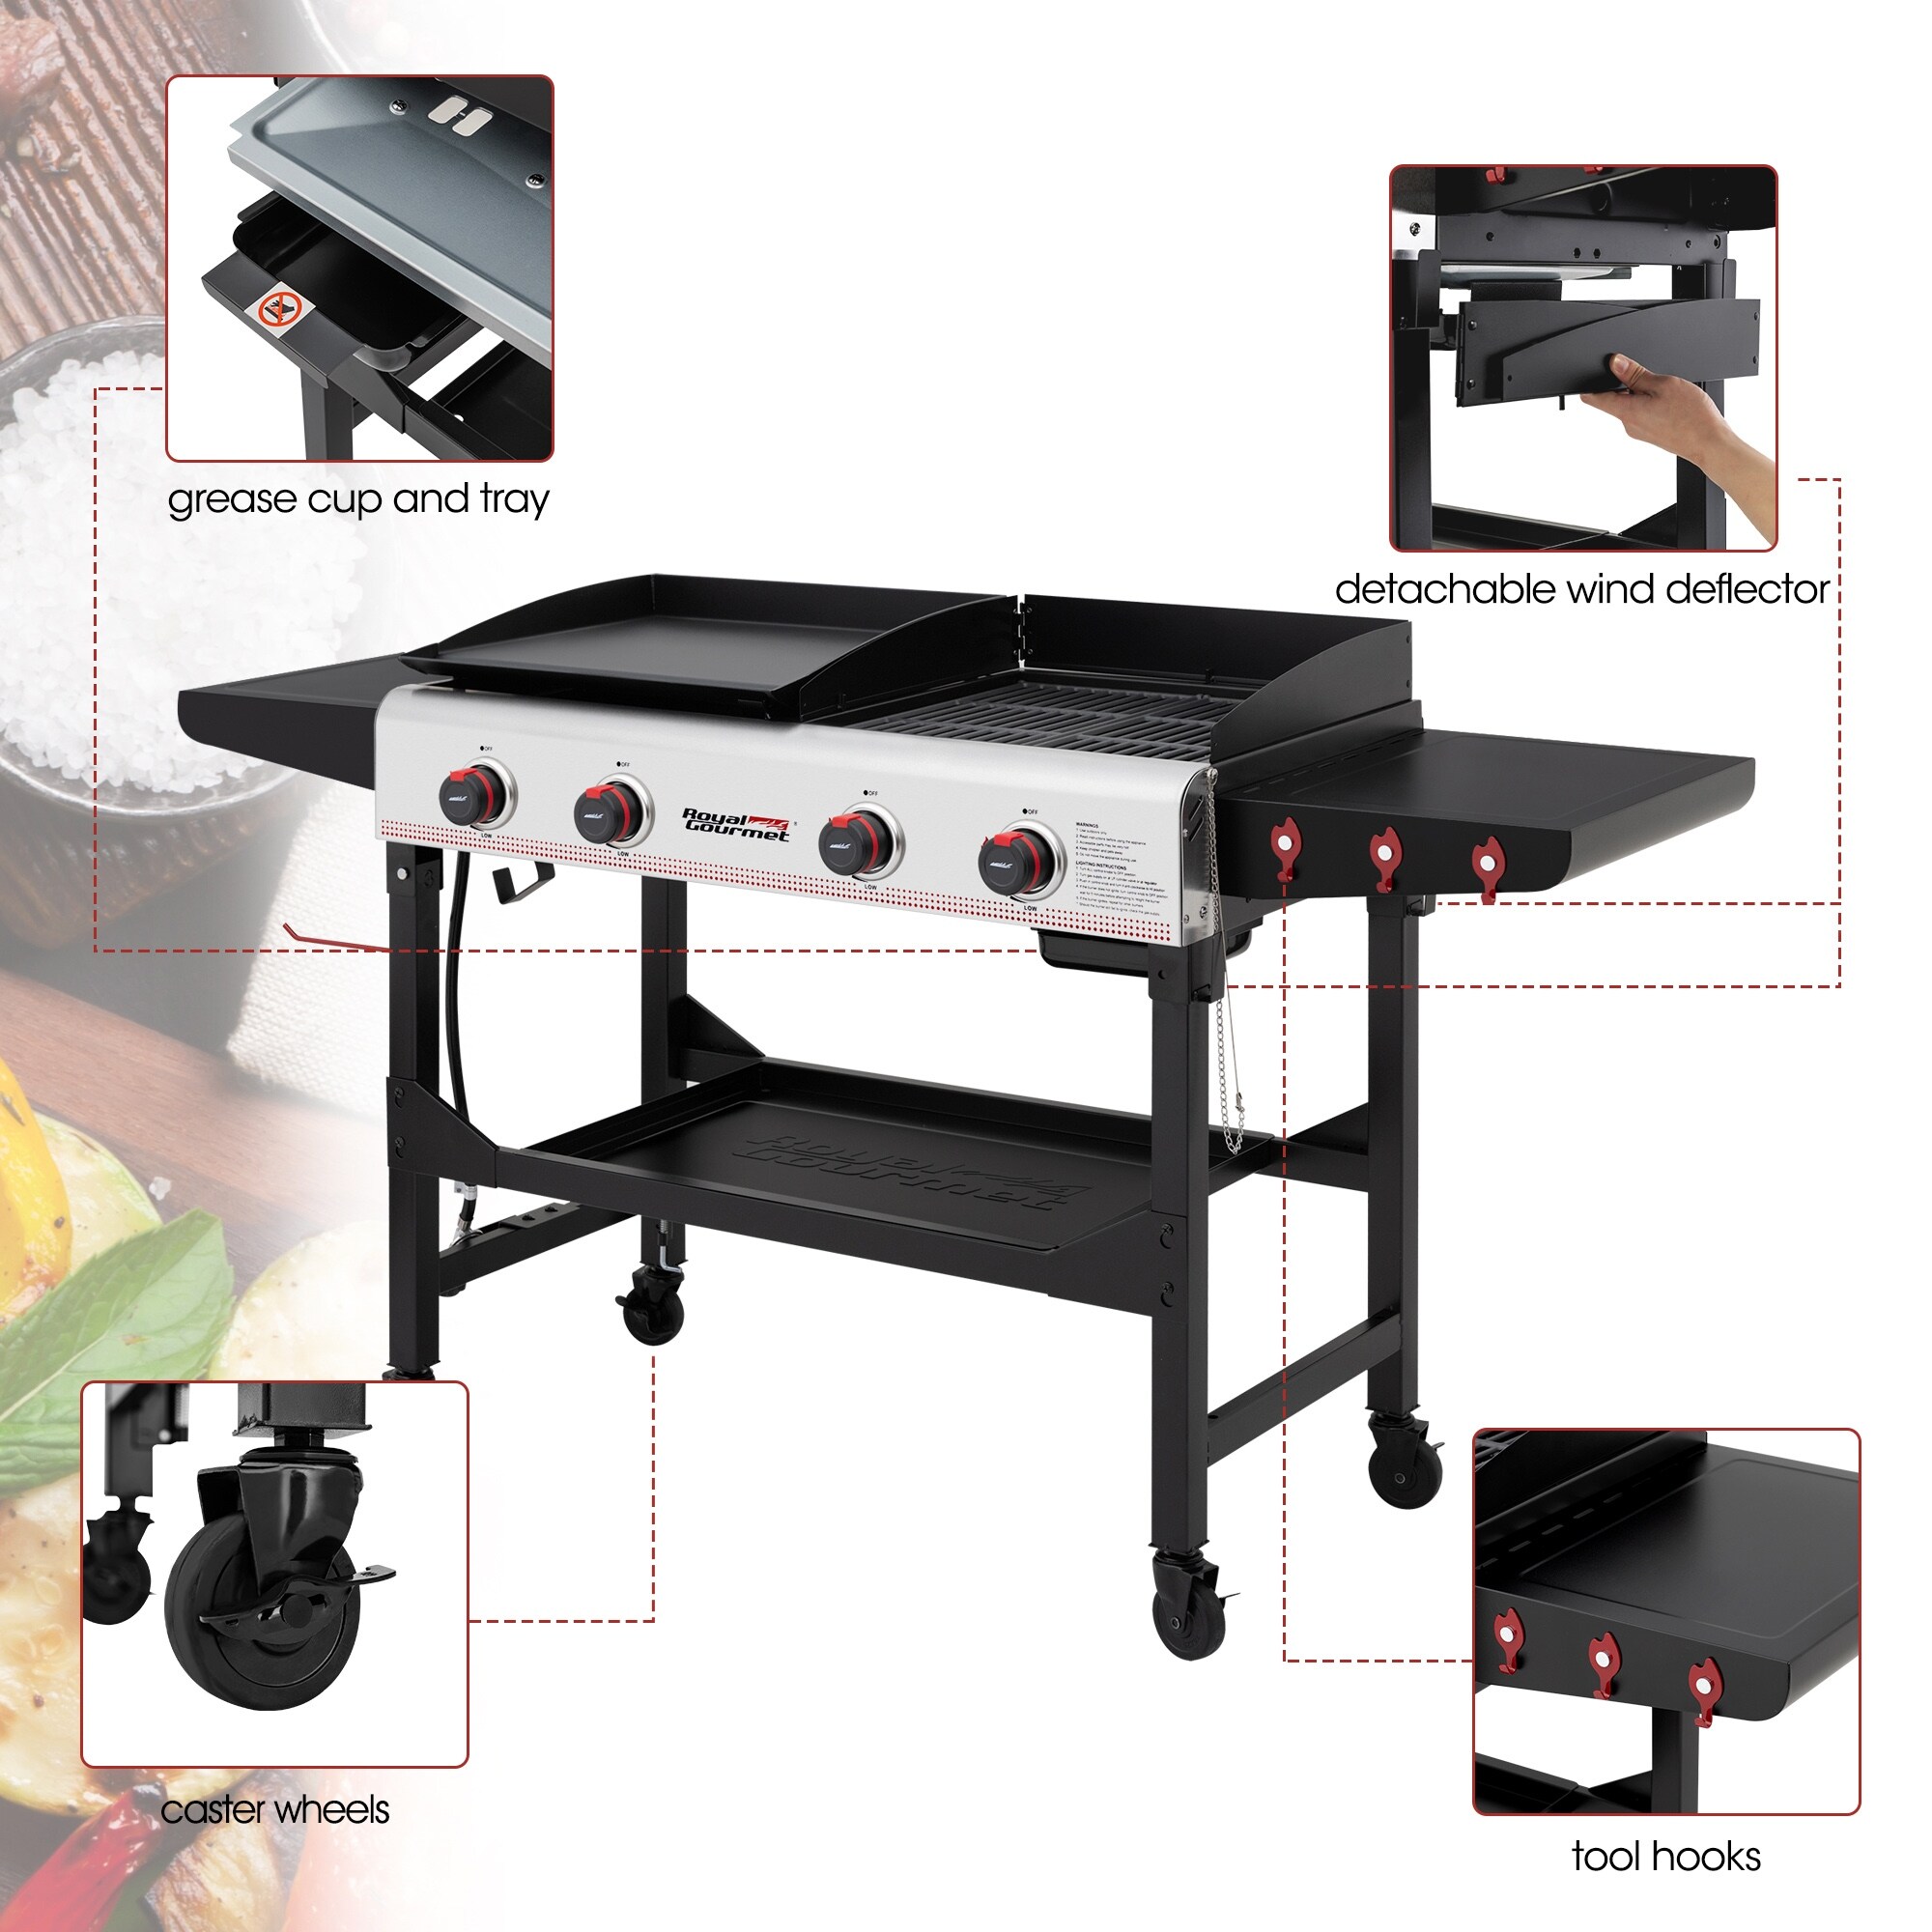 https://ak1.ostkcdn.com/images/products/is/images/direct/14b325e4958295a9f61cad151a1c8a55b78904d1/Royal-Gourmet-GD403-4-Burner-Portable-Flat-Top-Gas-Grill-and-Griddle-Combo-Grill-with-Folding-Legs%2C-48%2C000-BTU%2C-Black-%26-Silver.jpg